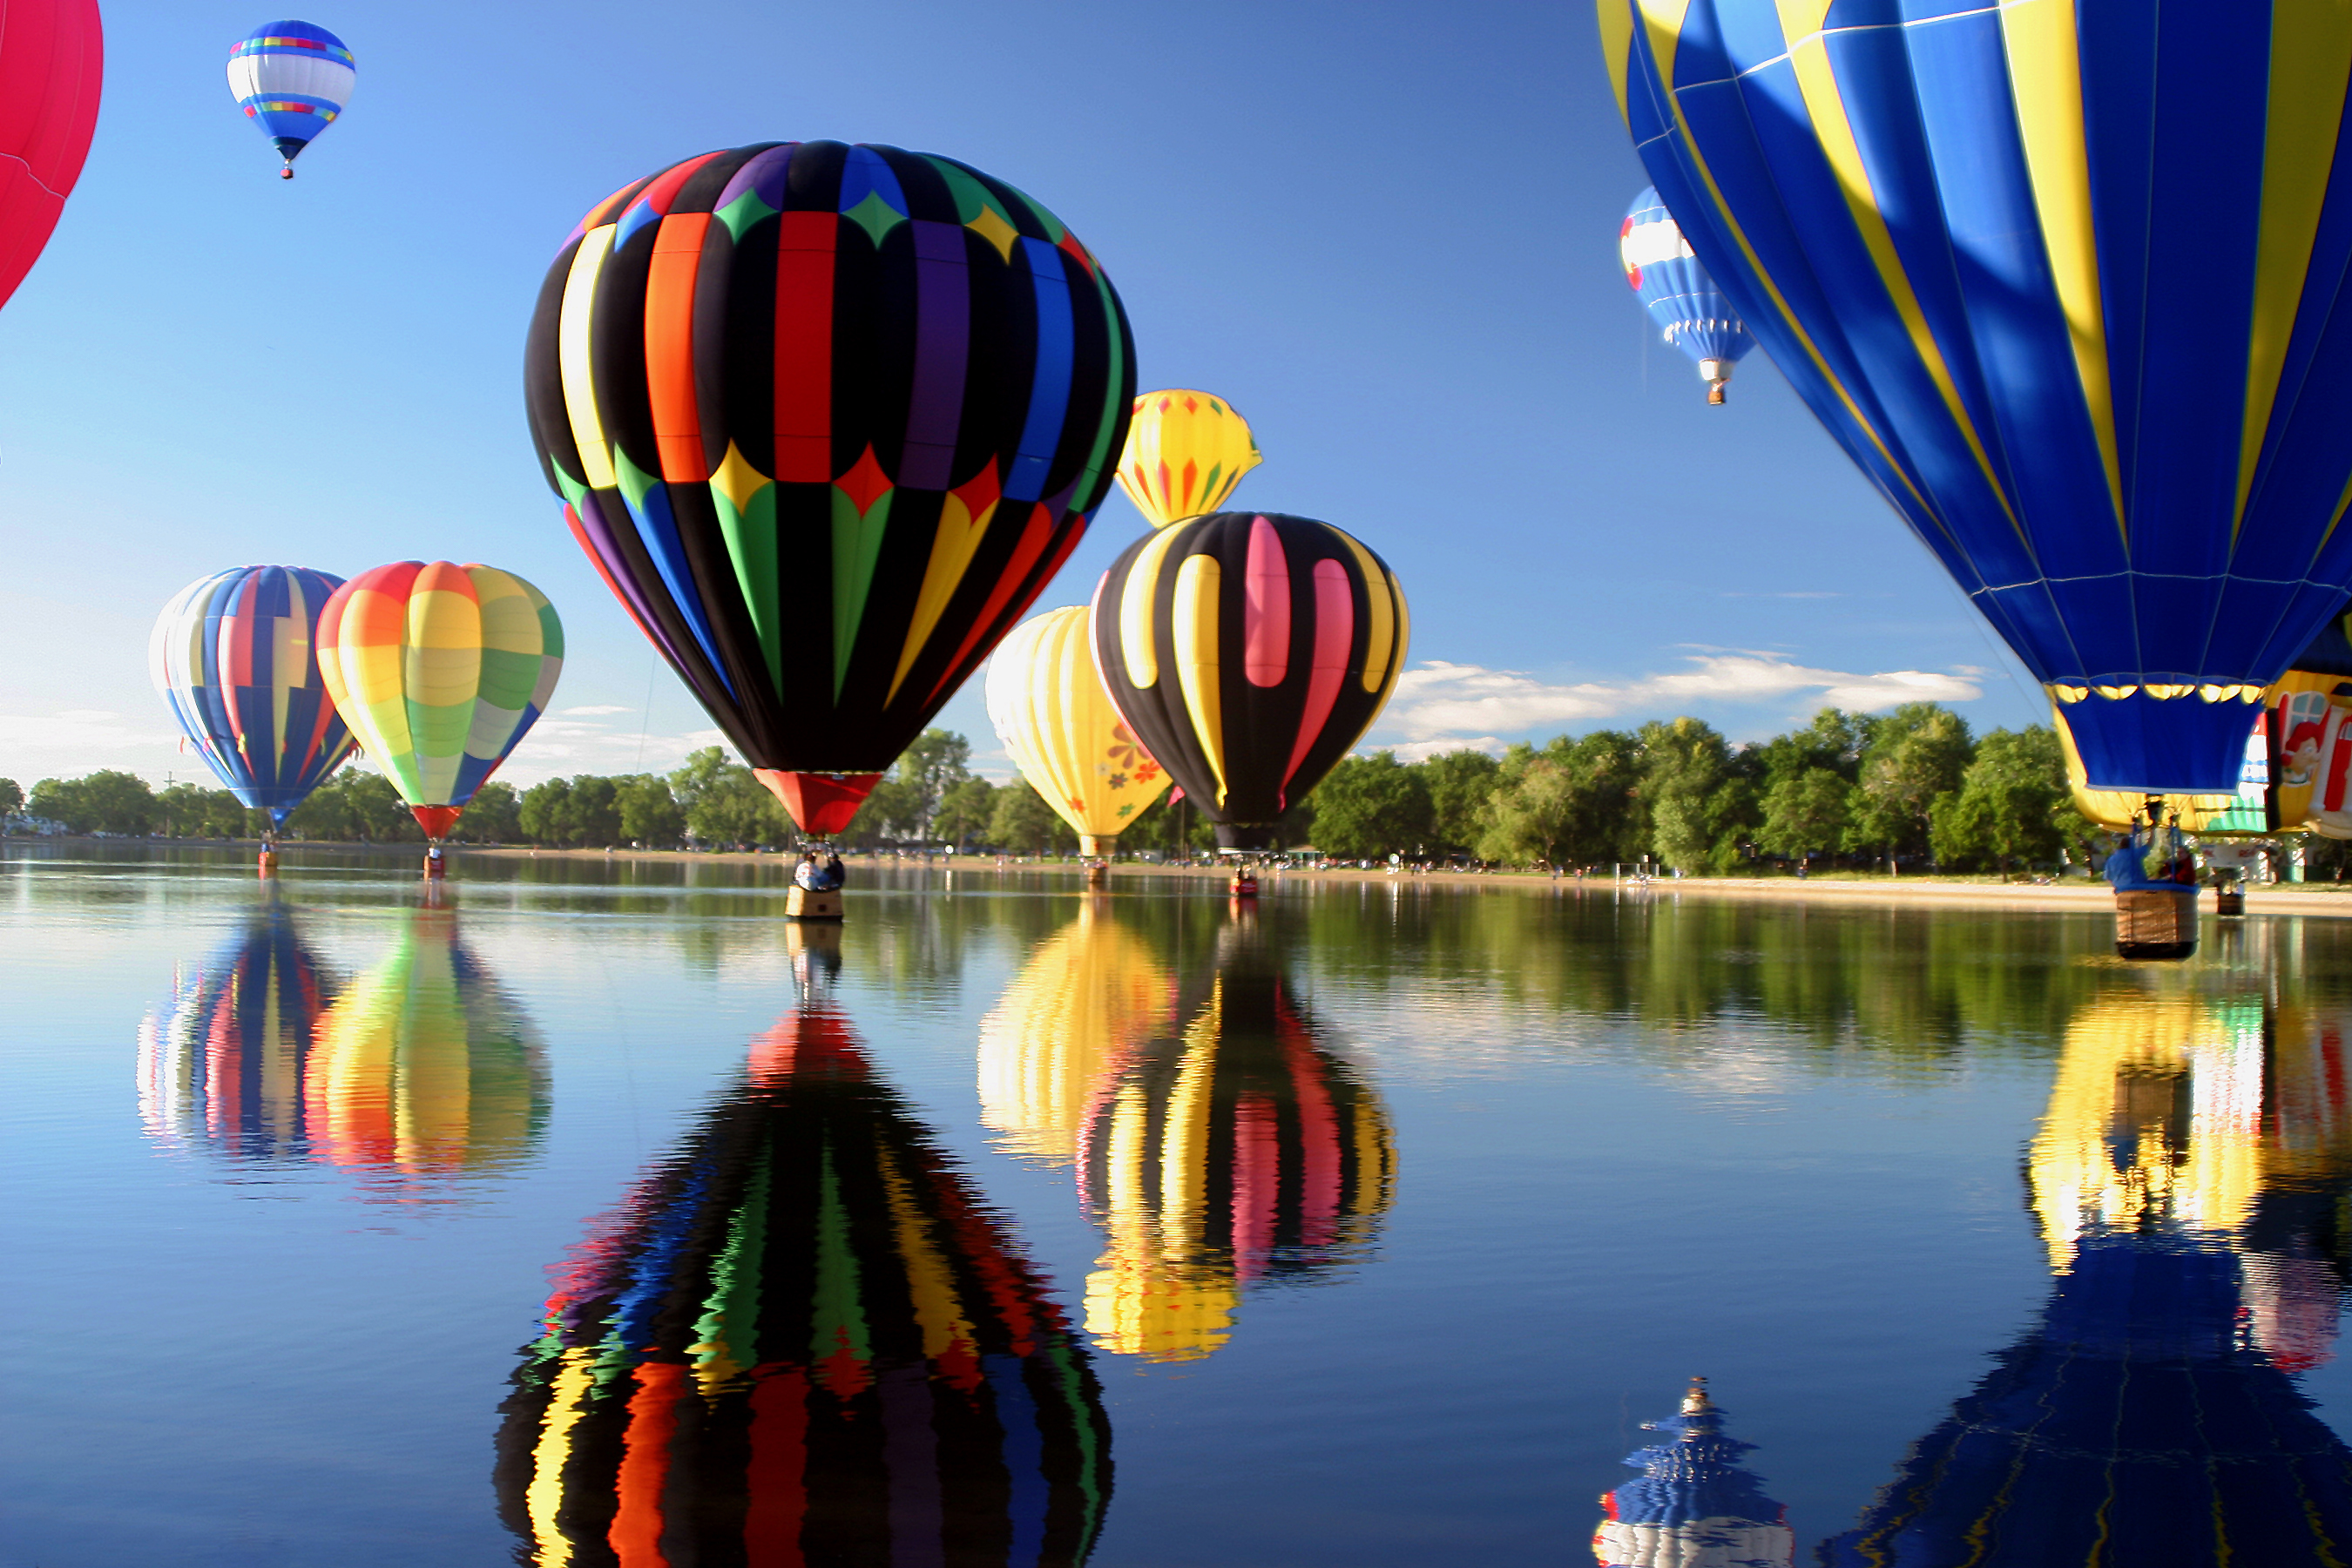 Amazing Hot Air Balloon Pictures & Backgrounds